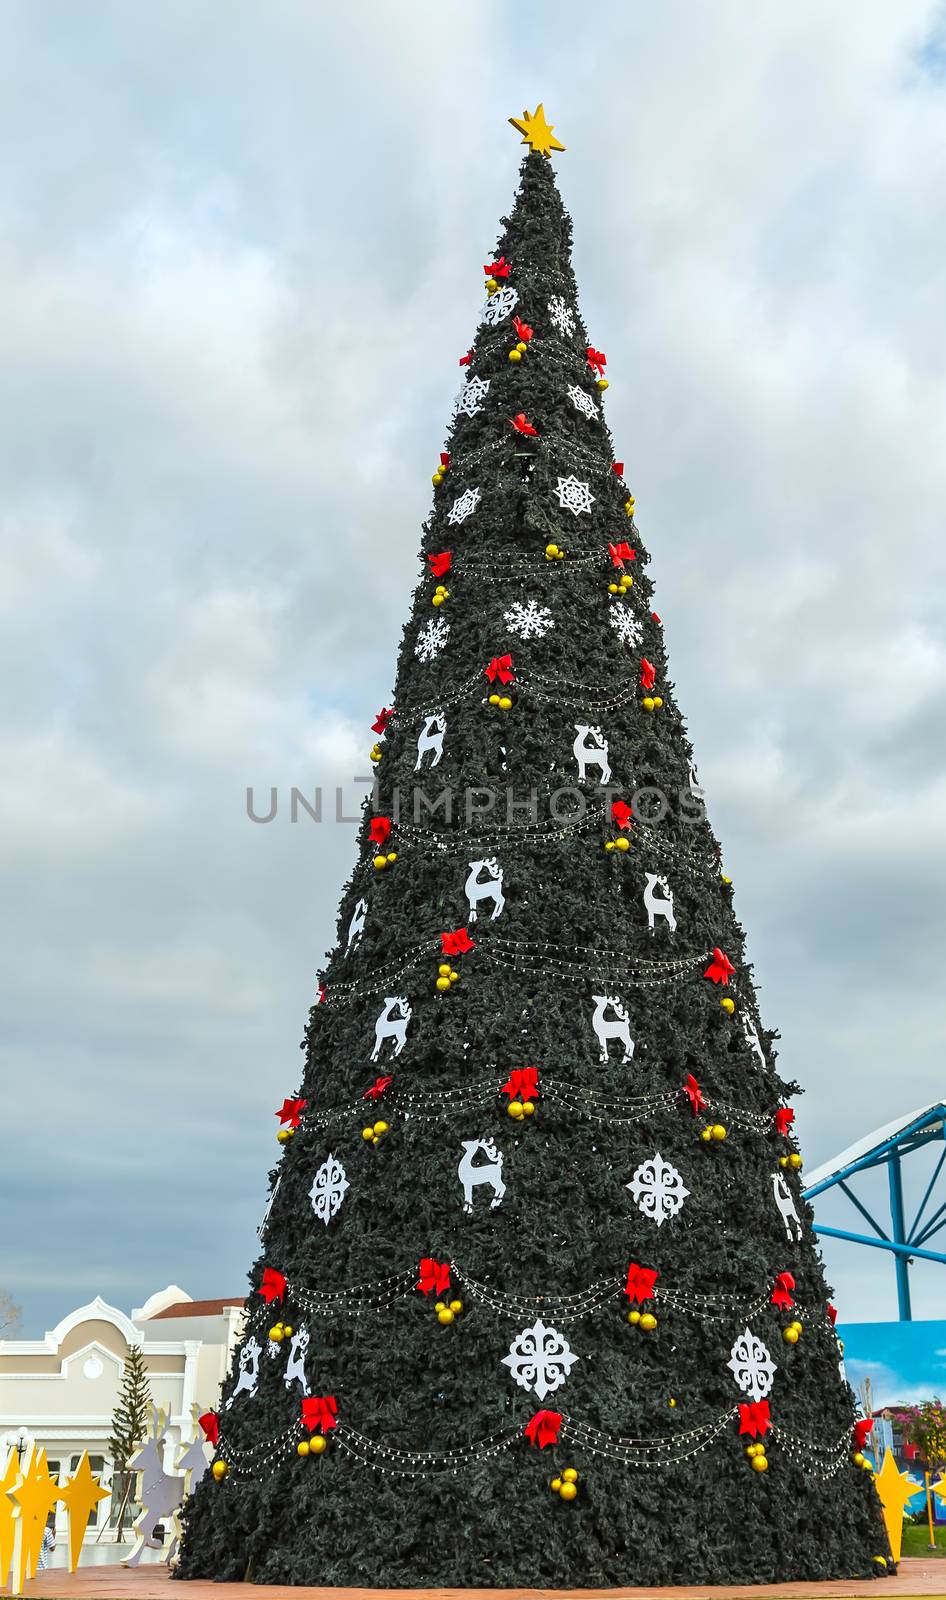 Christmas Tree. Happy New year Holidays Merry Christmas, background blur textures soft focus